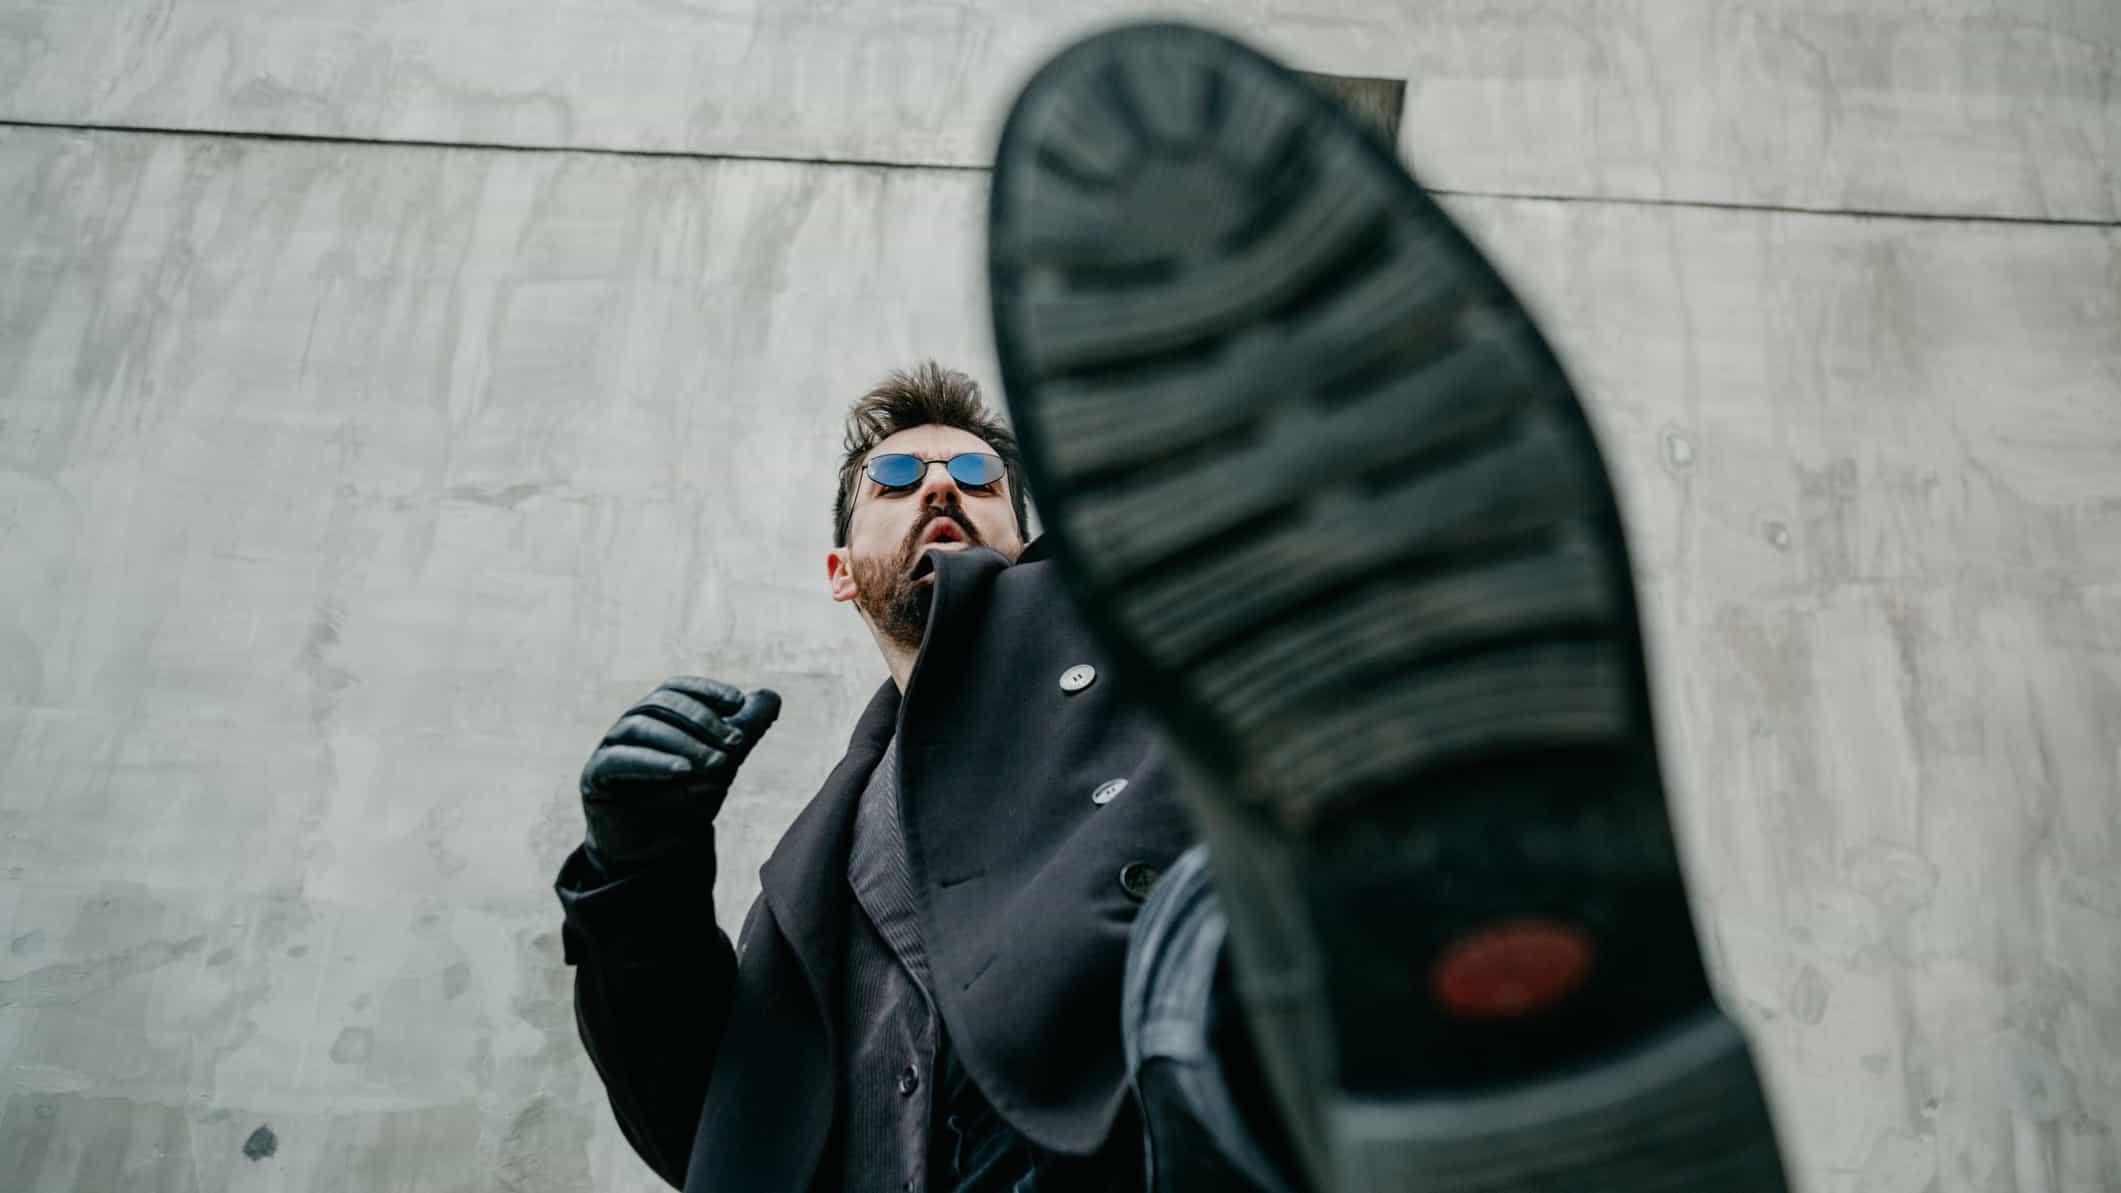 A picture taken from ground level focusing on the underside of a man's boot with the stylishly dressed man in the background wearing black amid a cold concrete background.